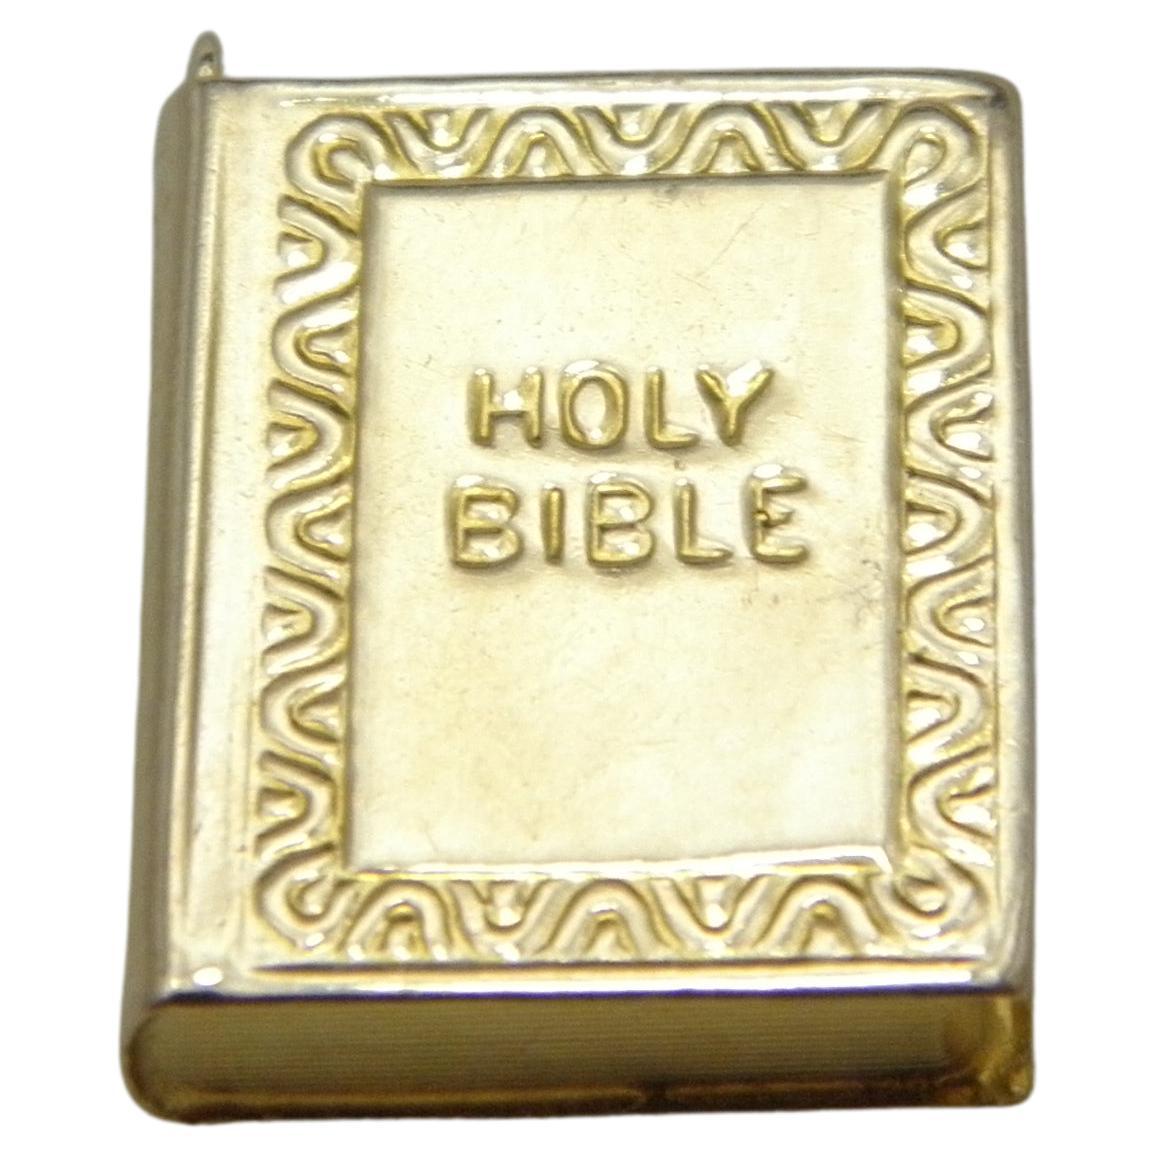 Vintage 9ct Gold Holy Bible Pendant Charm Fob c1962 375 Purity Large WHC